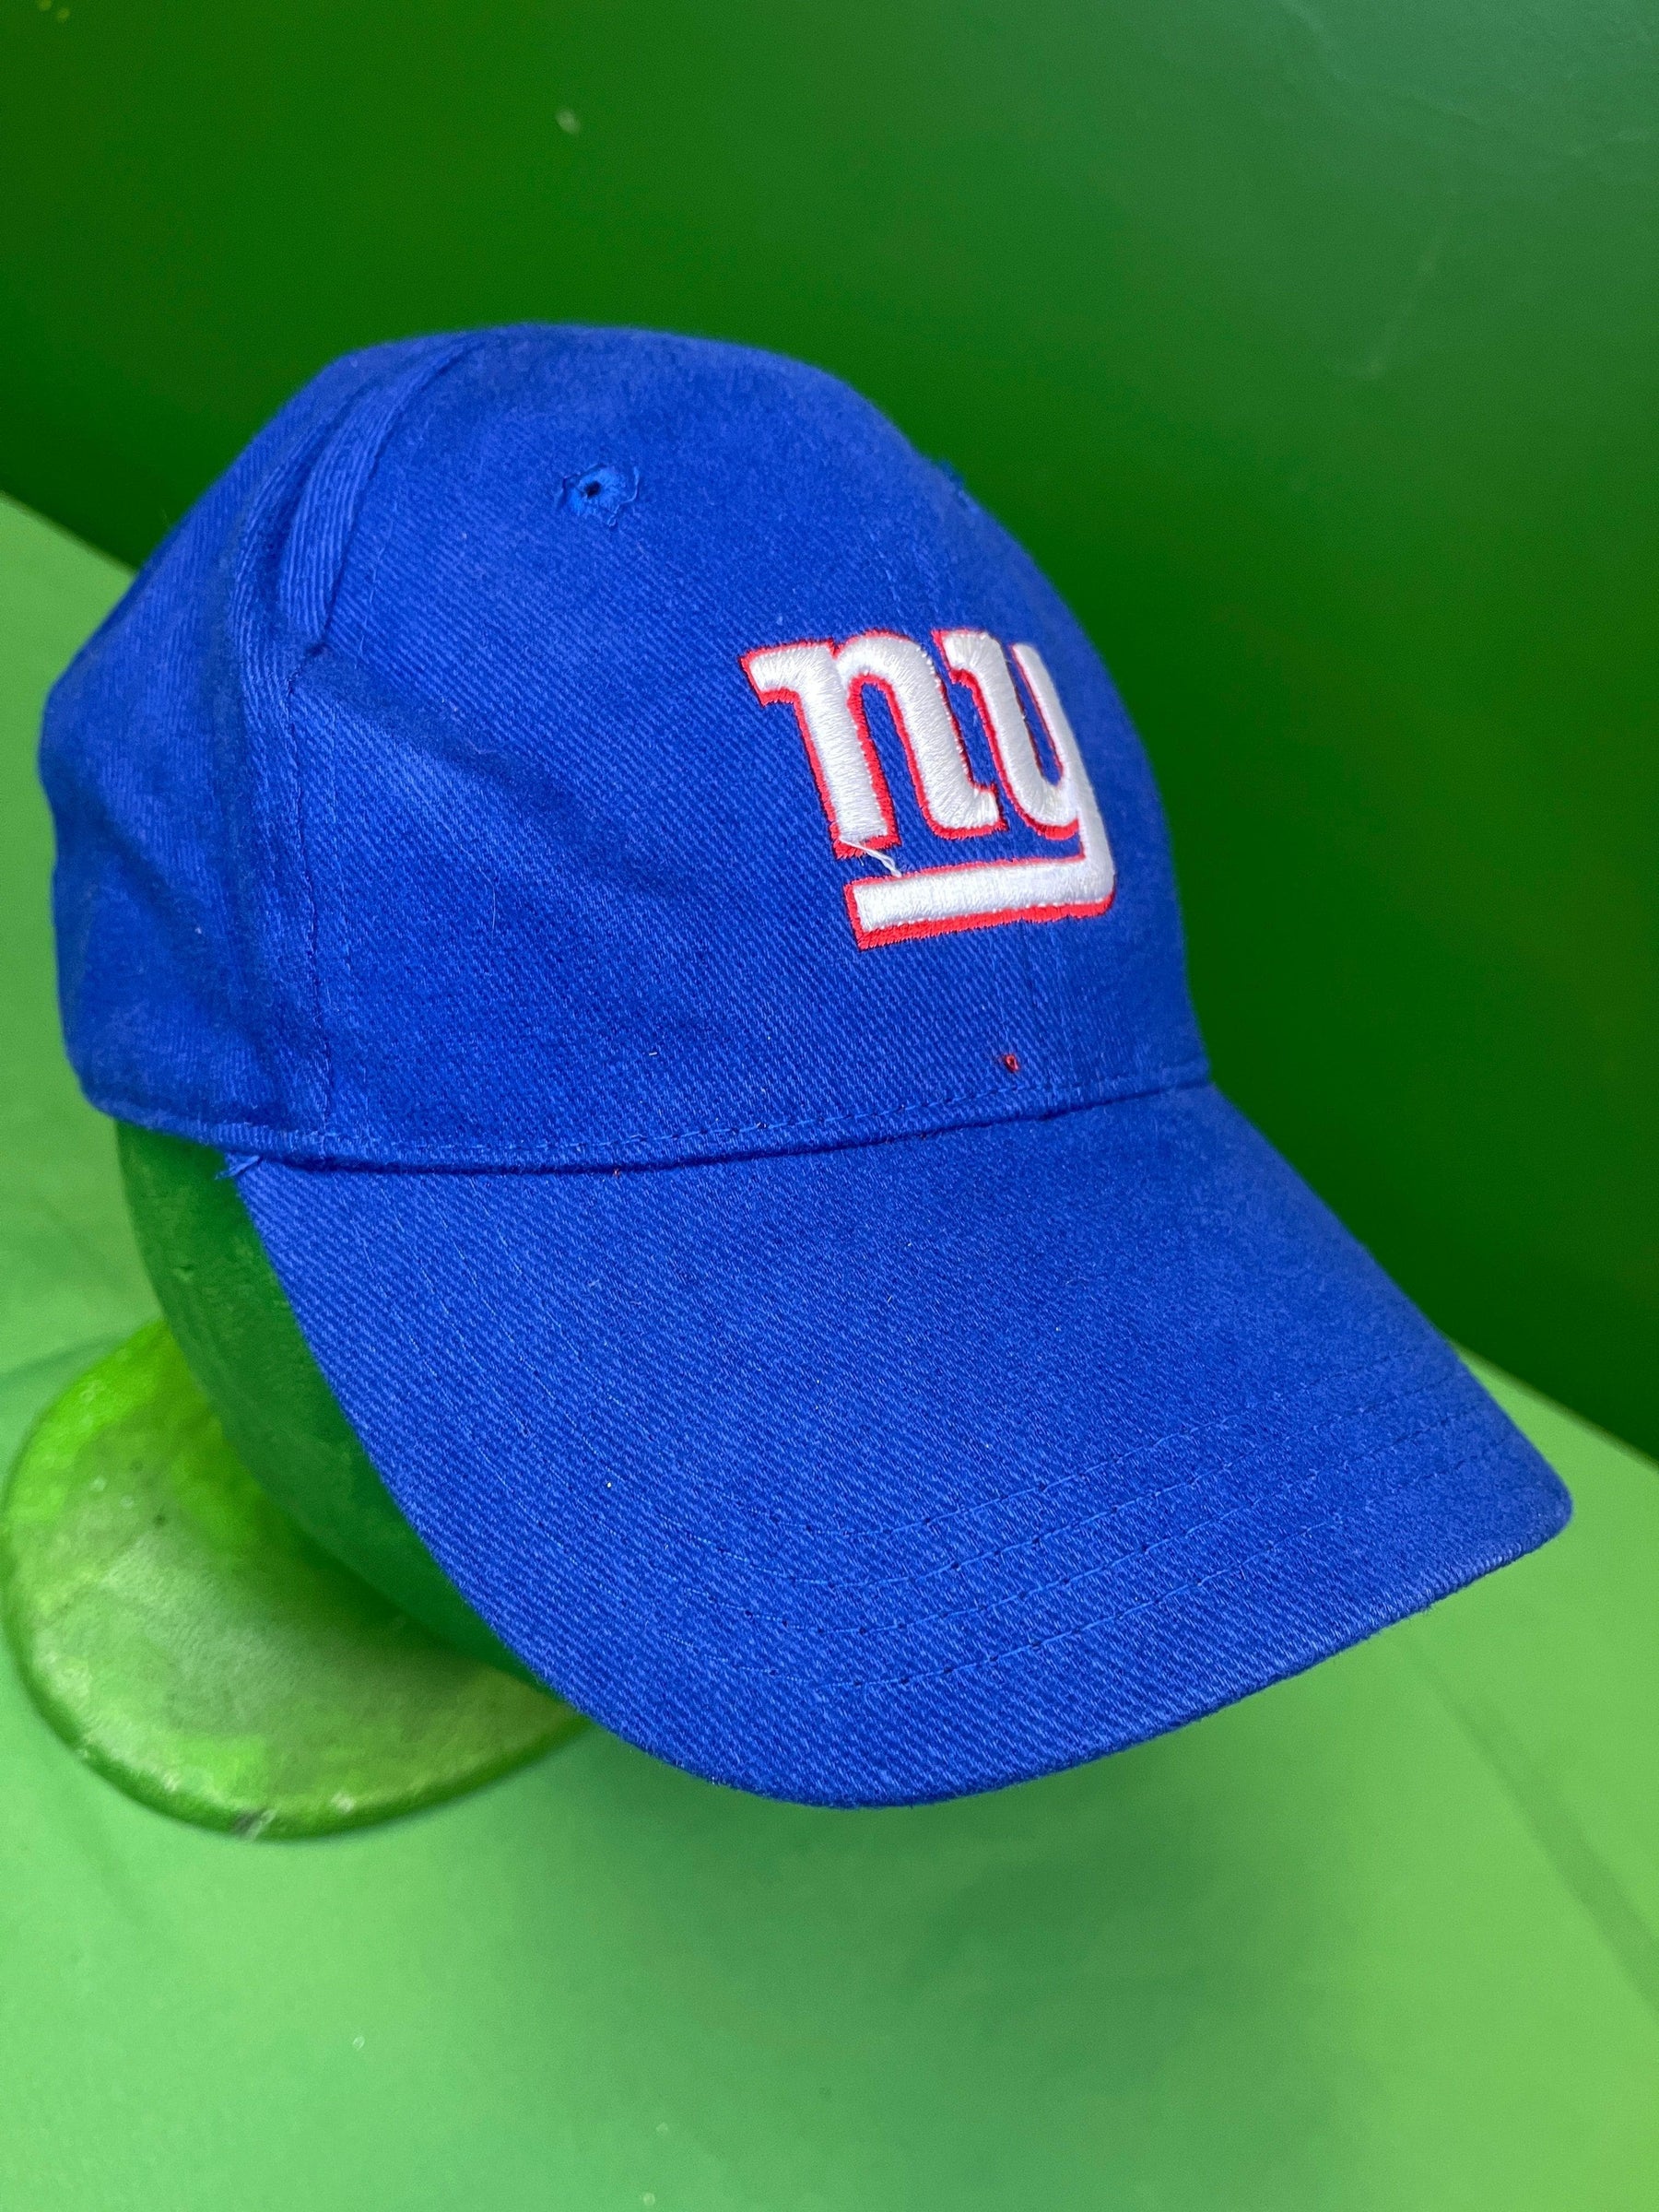 NFL New York Giants Blue Cotton Cap/Hat Youth OSFM Appx. 8-20